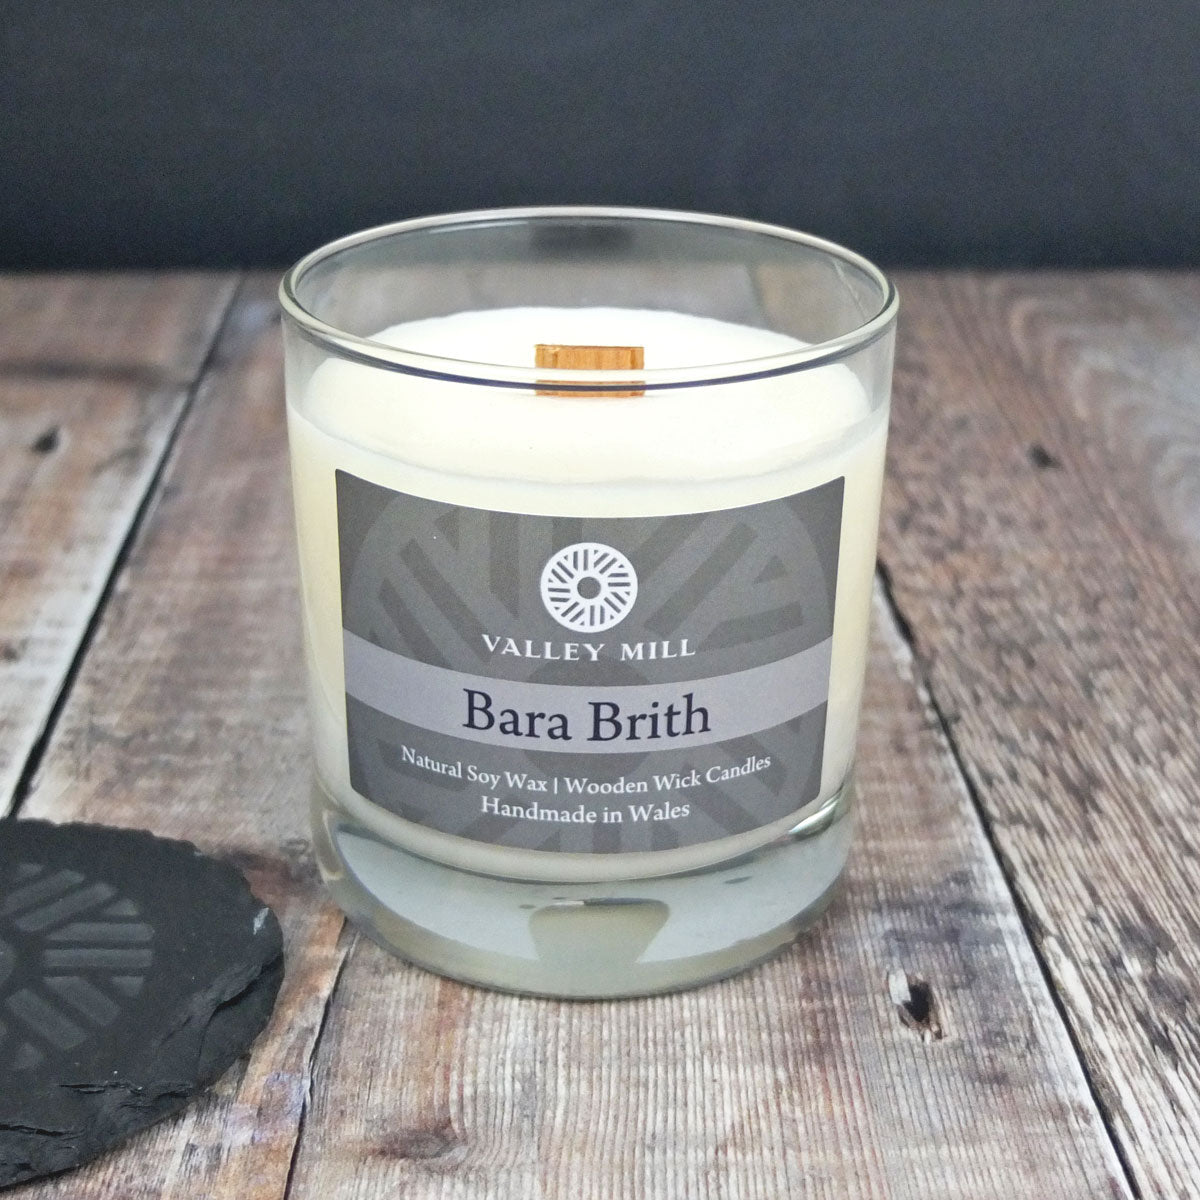 Valley Mill Bara Brith Boxed Candle